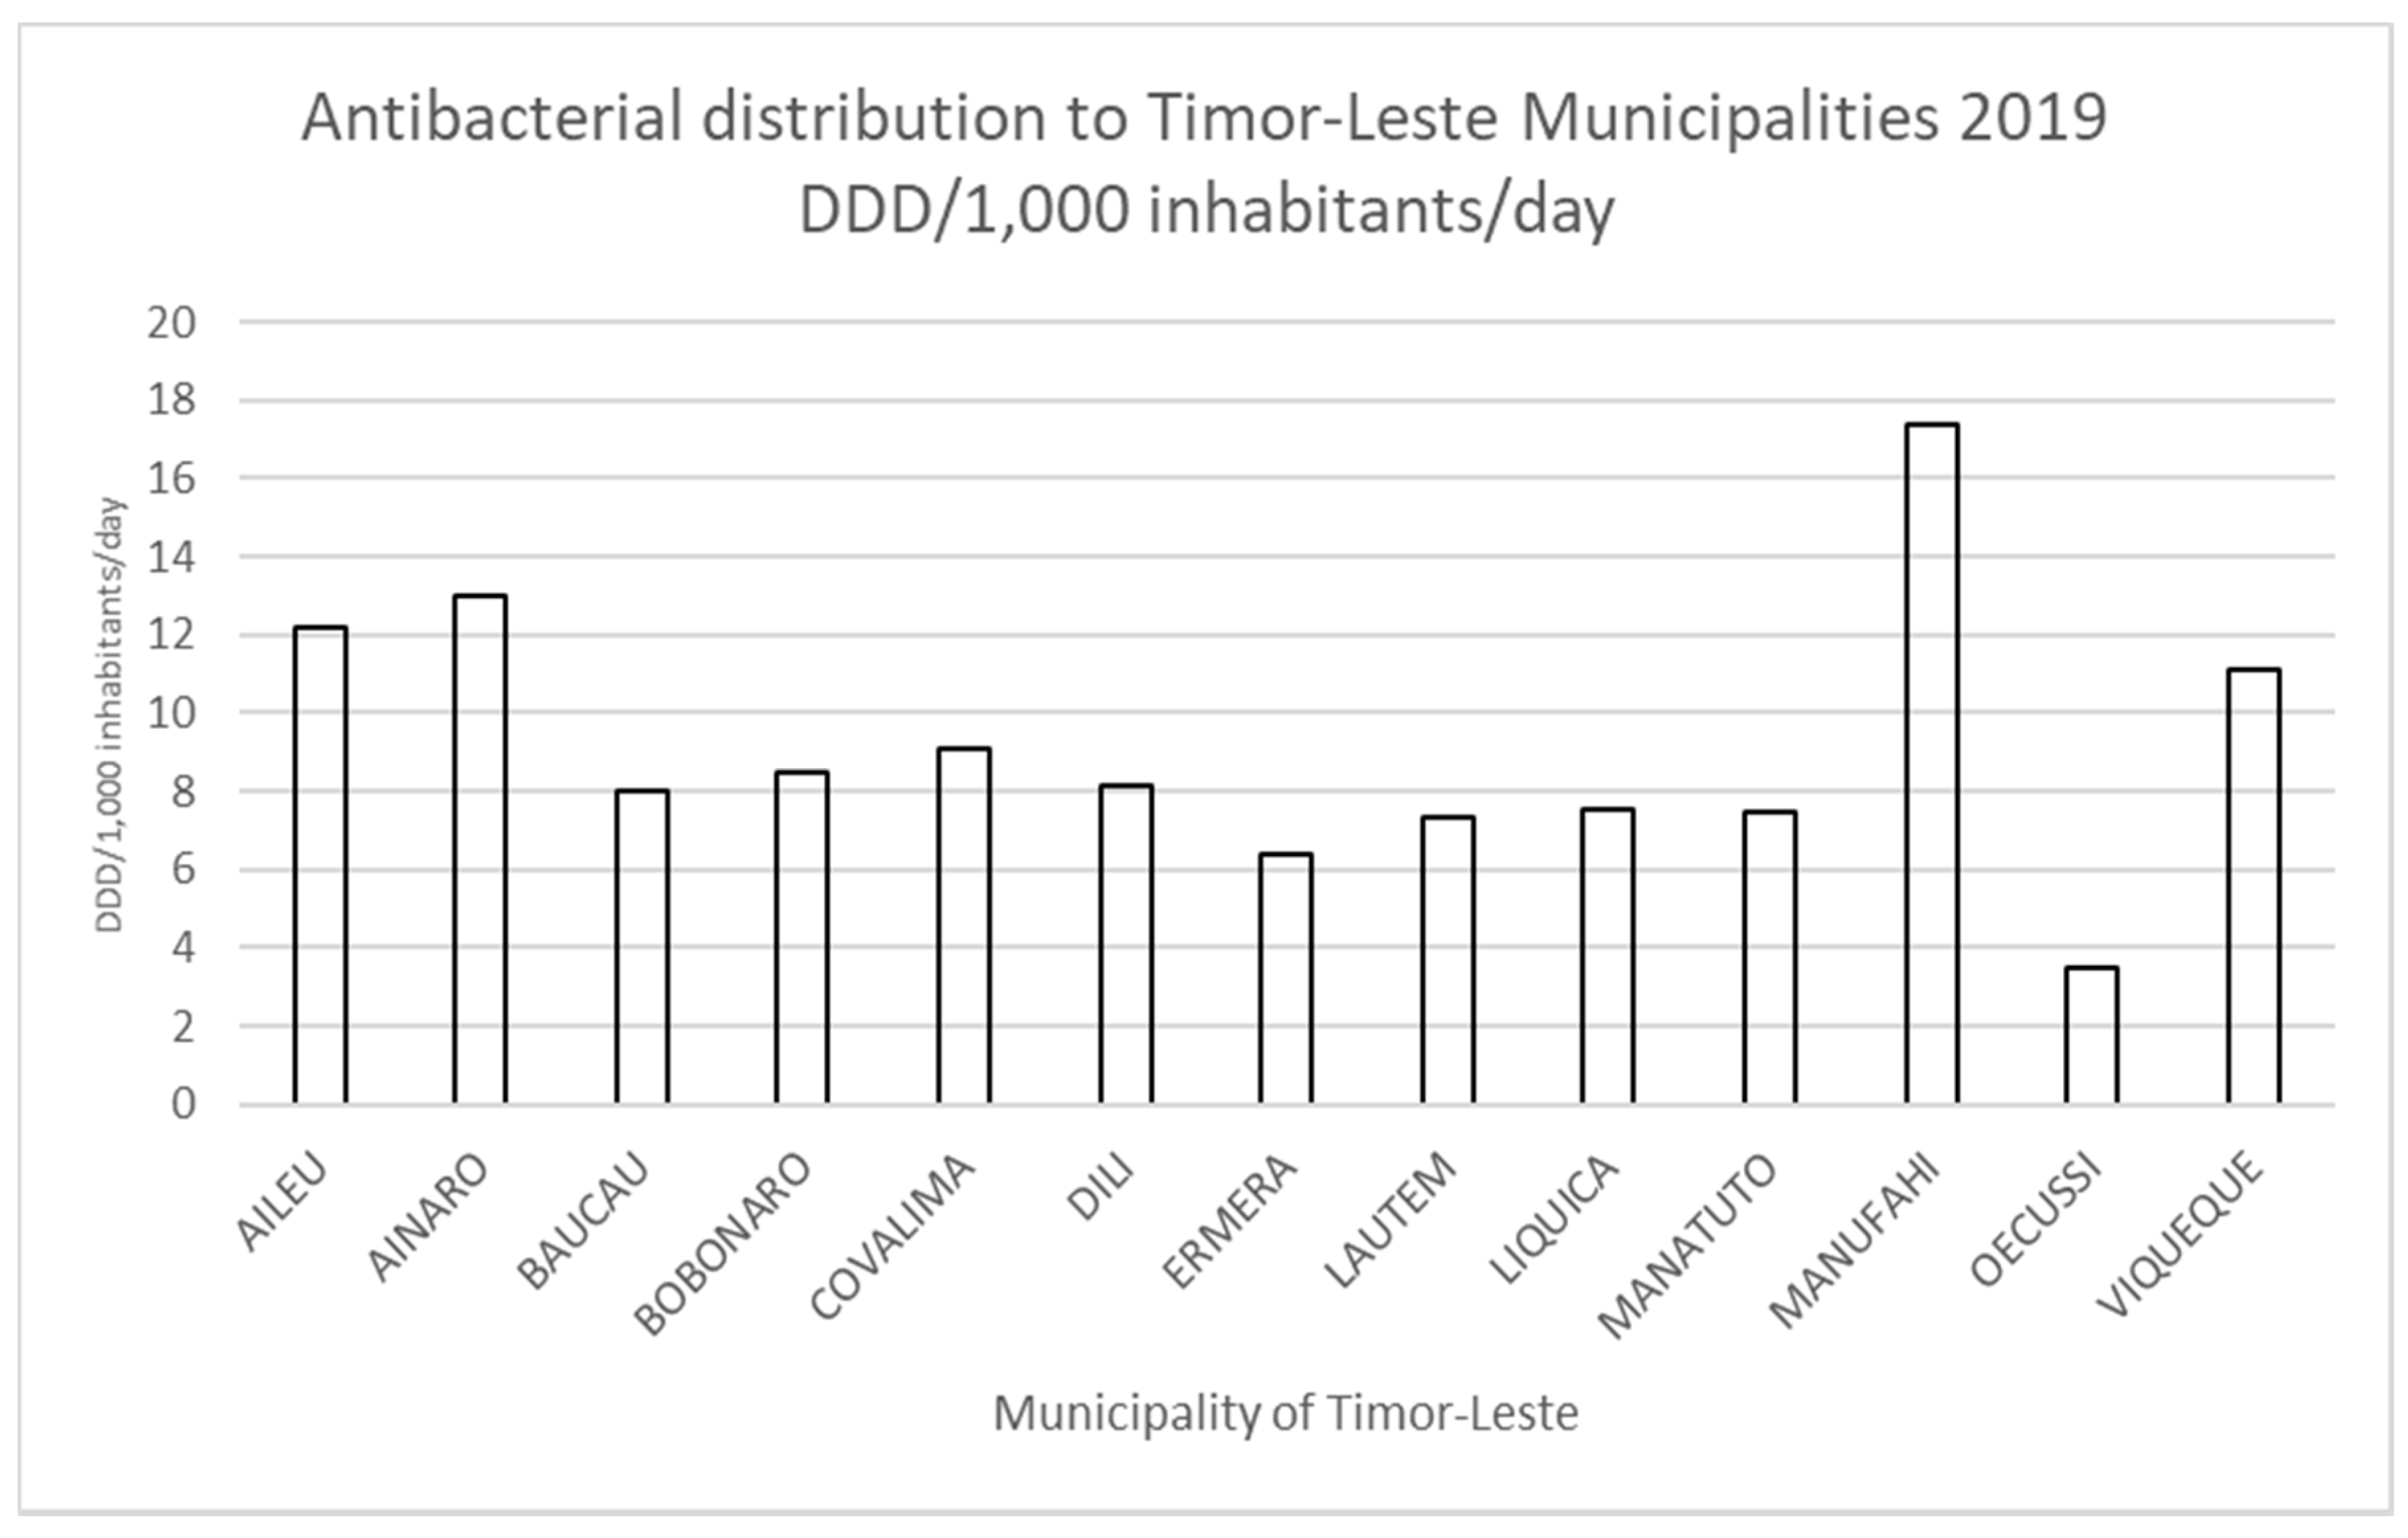 Antibiotics | Free Full-Text | Estimates of Antibacterial Consumption in  Timor-Leste Using Distribution Data and Variation in Municipality Usage  Patterns | HTML